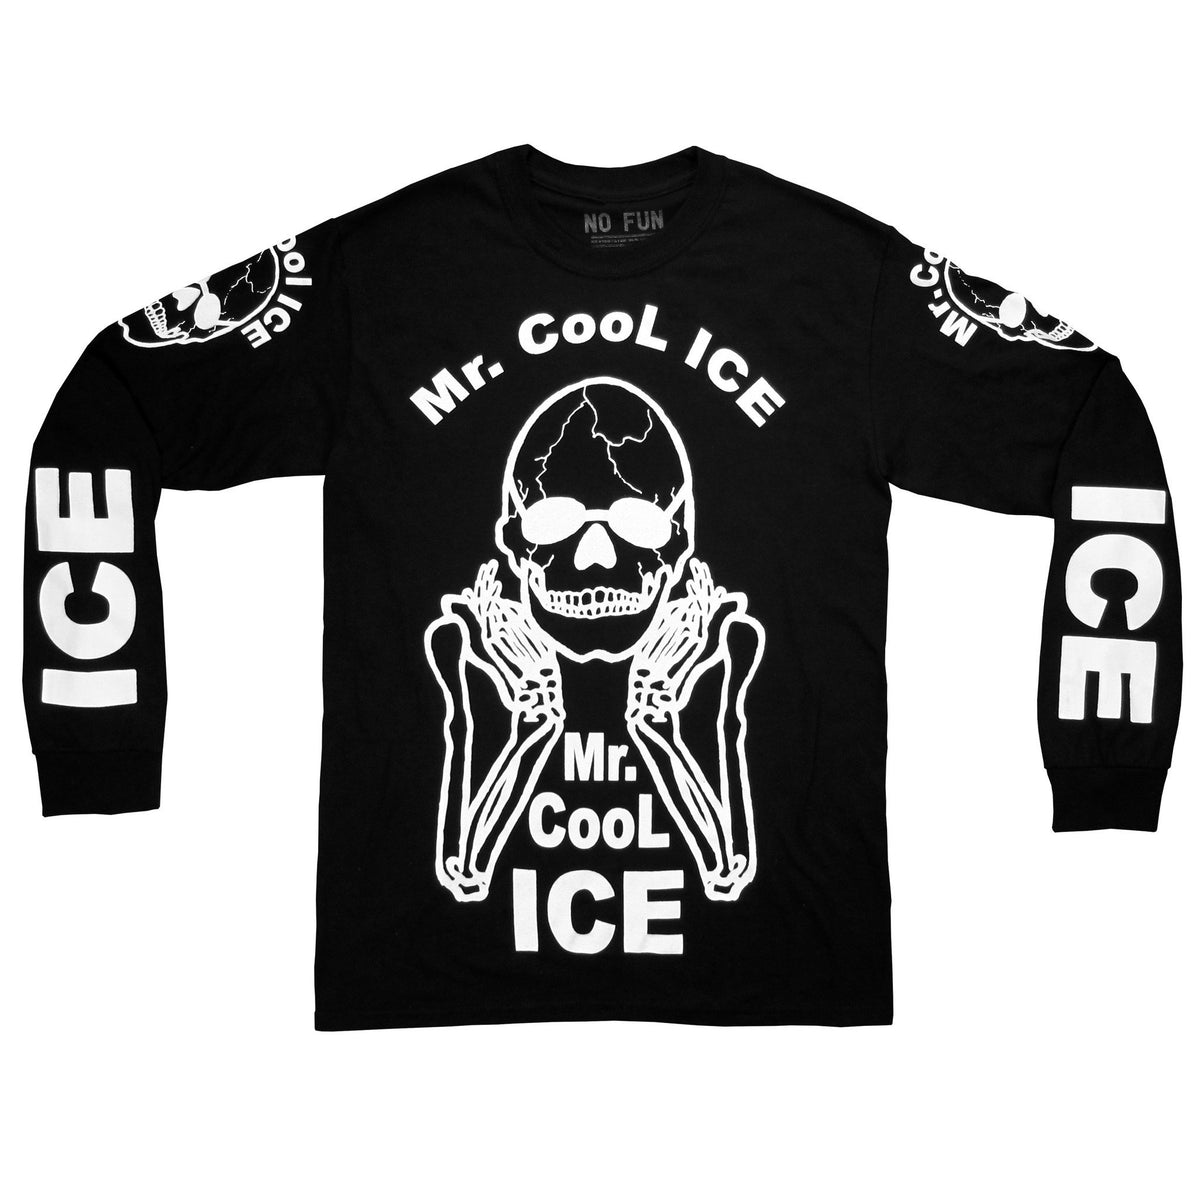 Front of the Mr. Cool Ice shirt by No Fun®. Shirt references a man who had bones and the words "Cool Ice" tattooed all over his body.